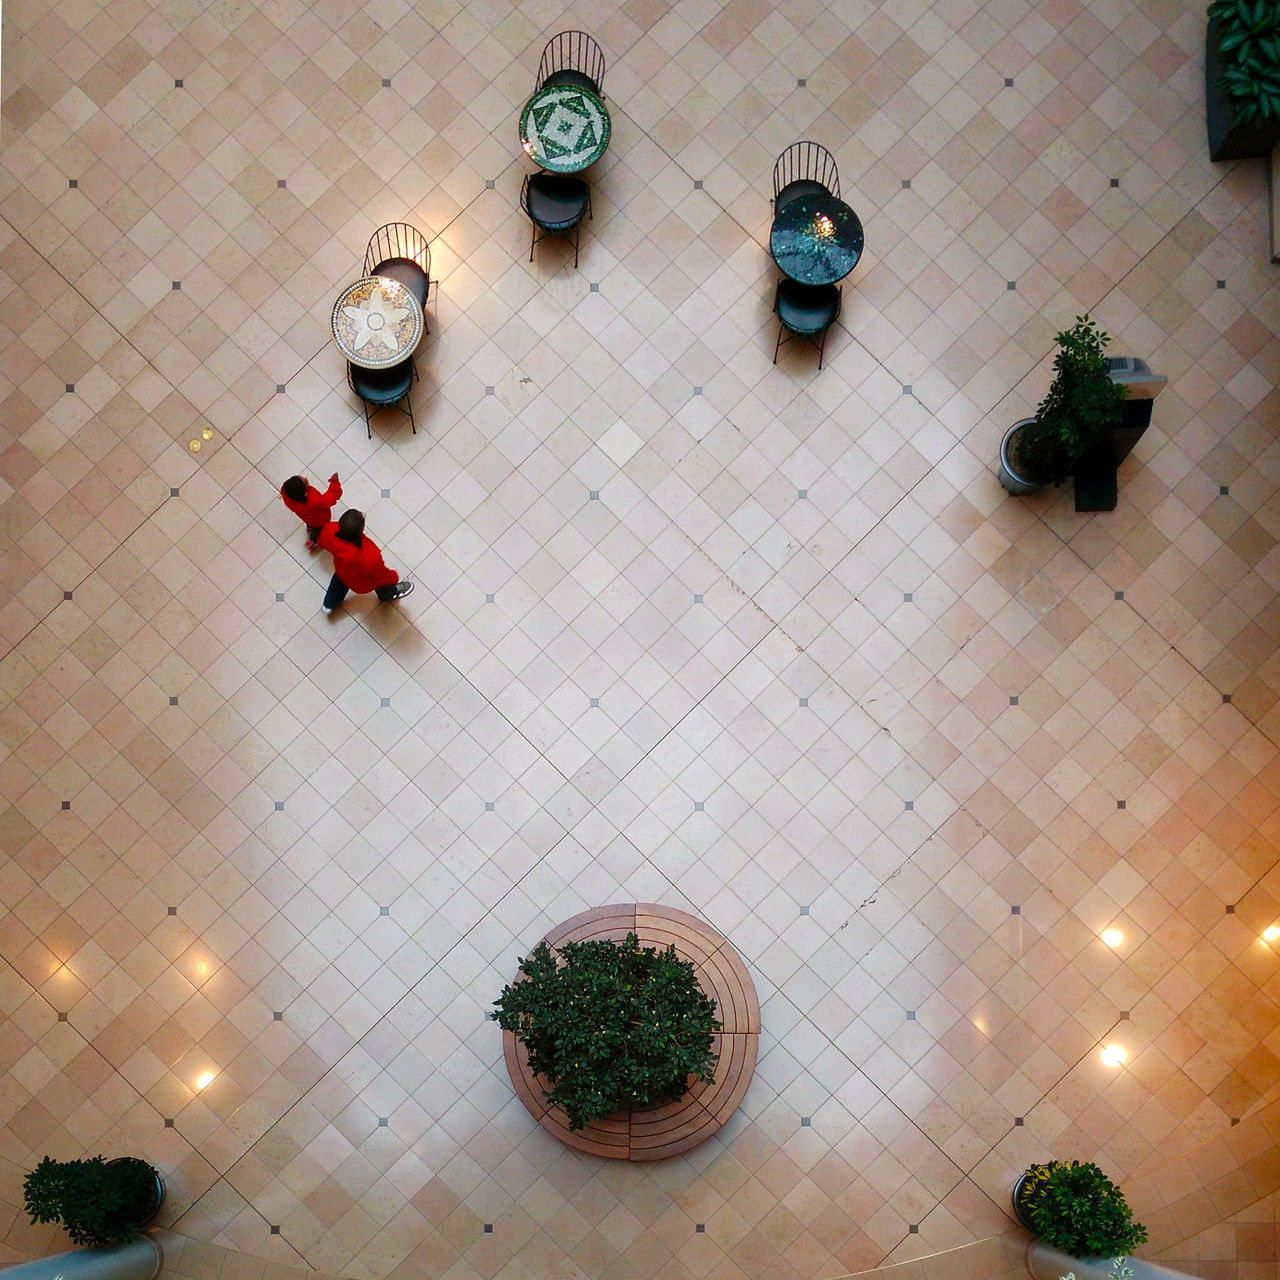 HIGH ANGLE VIEW OF PEOPLE ON TILED FLOOR IN CORRIDOR